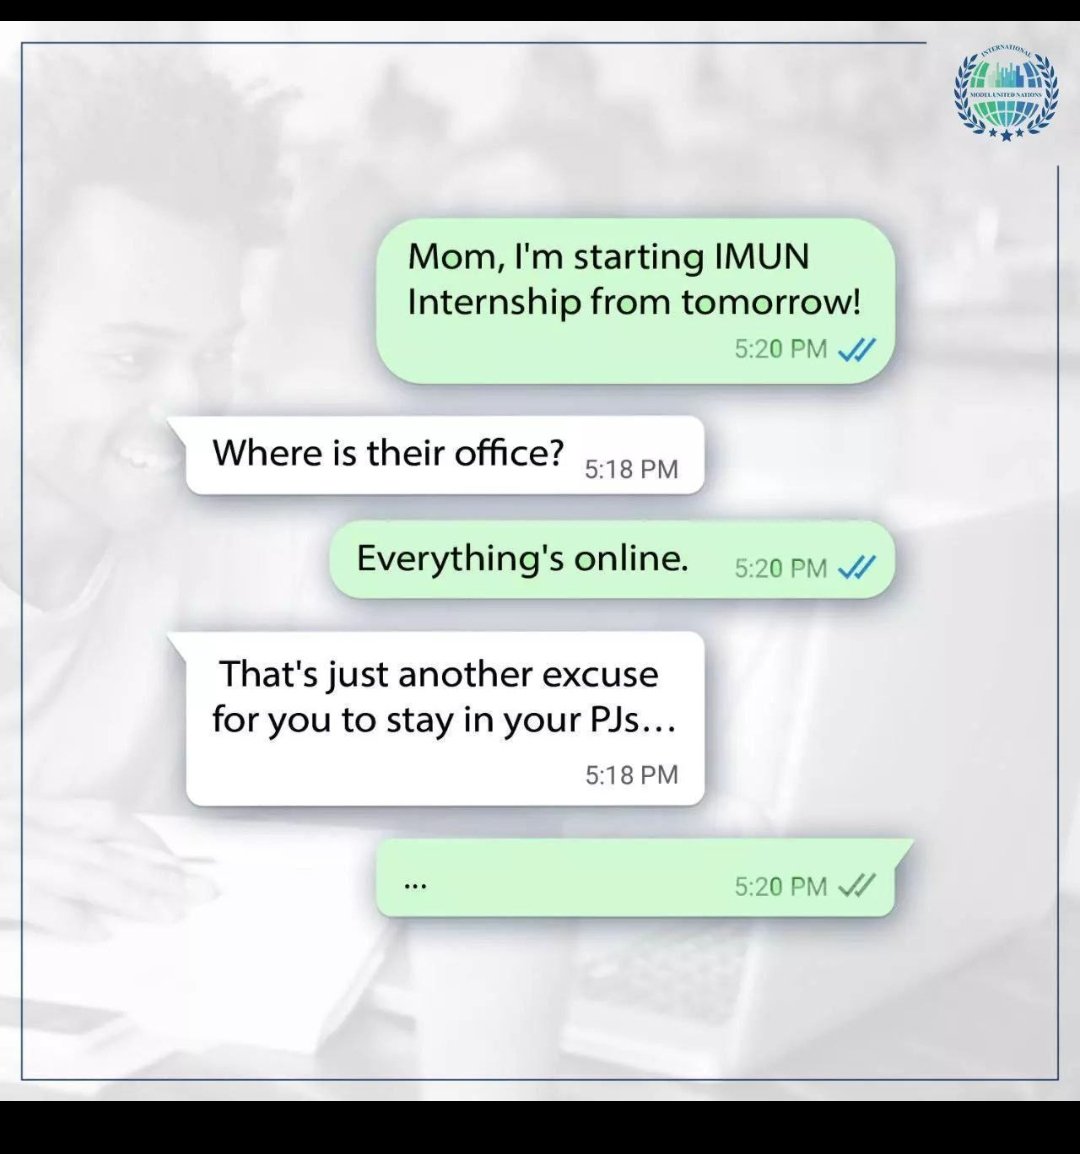 Mom isn't easily impressed. Neither are we.
#InternationalMUN #mun #imun #modelunitednations #imun2023 #youth #globalopportunity #opportunity #conference #international #internationalconference #diplomacy #leaders #youngleaders #unitednations #un #munconference #online